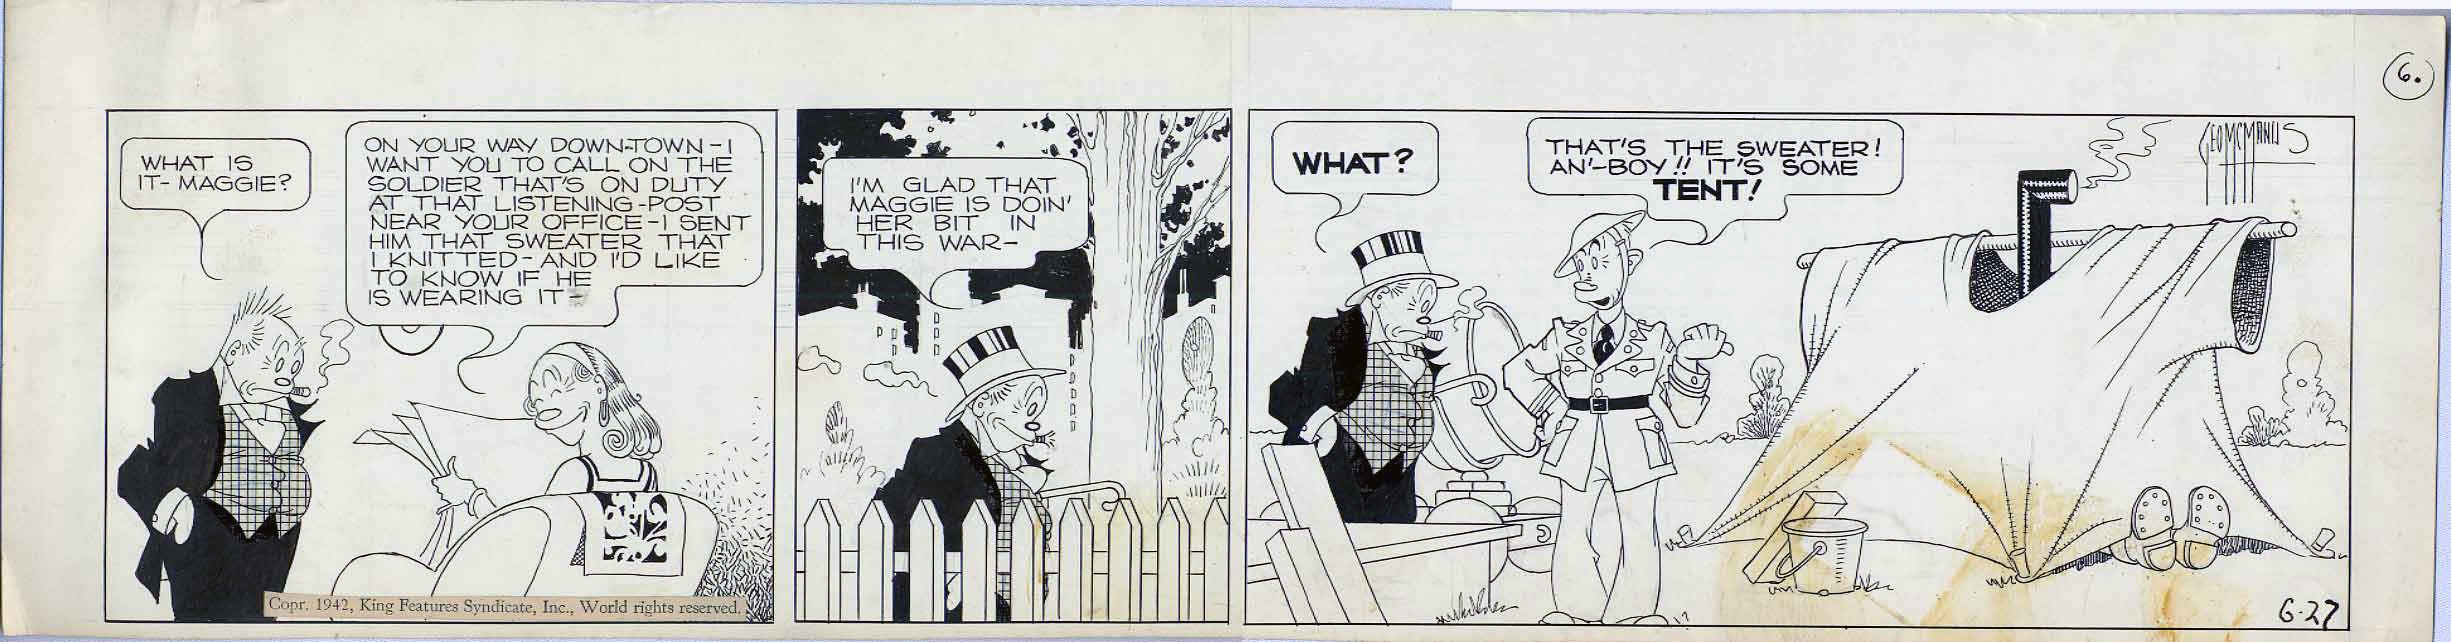 Bringing Up Father (06/27/42) by George McManus, in Brian Coppola's Strip  Art Comic Art Gallery Room